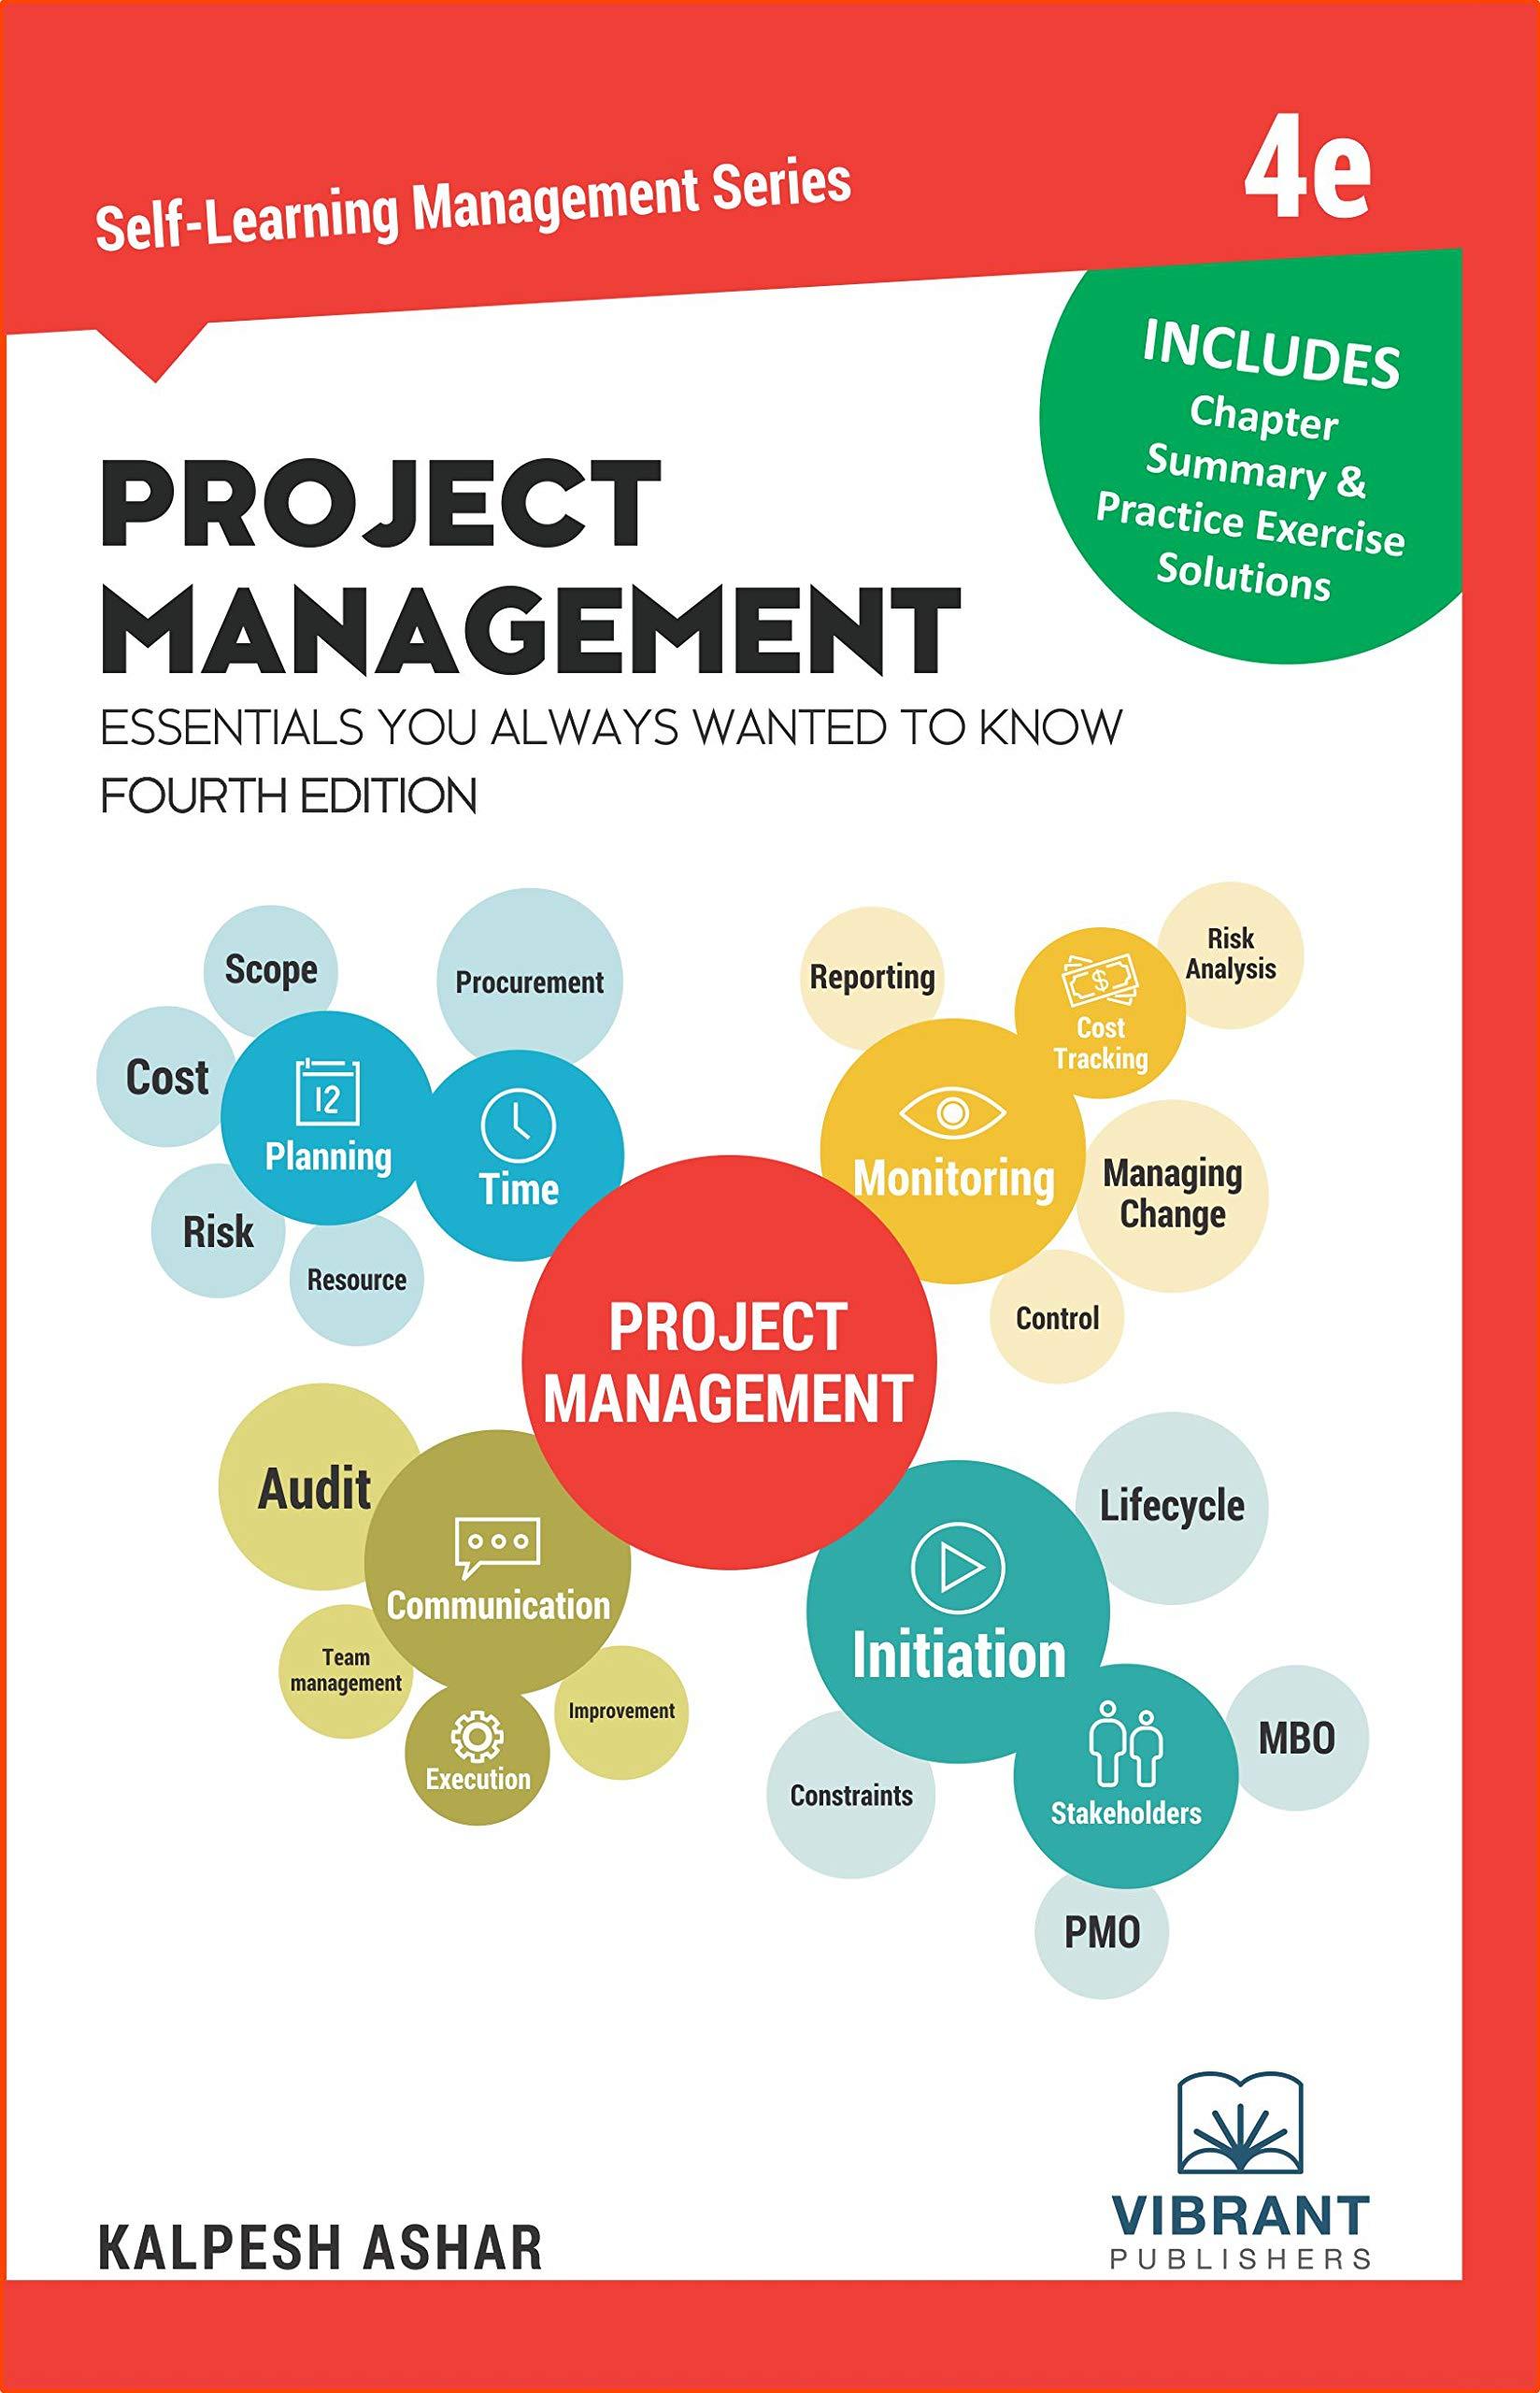 project management essentials you always wanted to know 4th edition vibrant publishers, kalpesh ashar